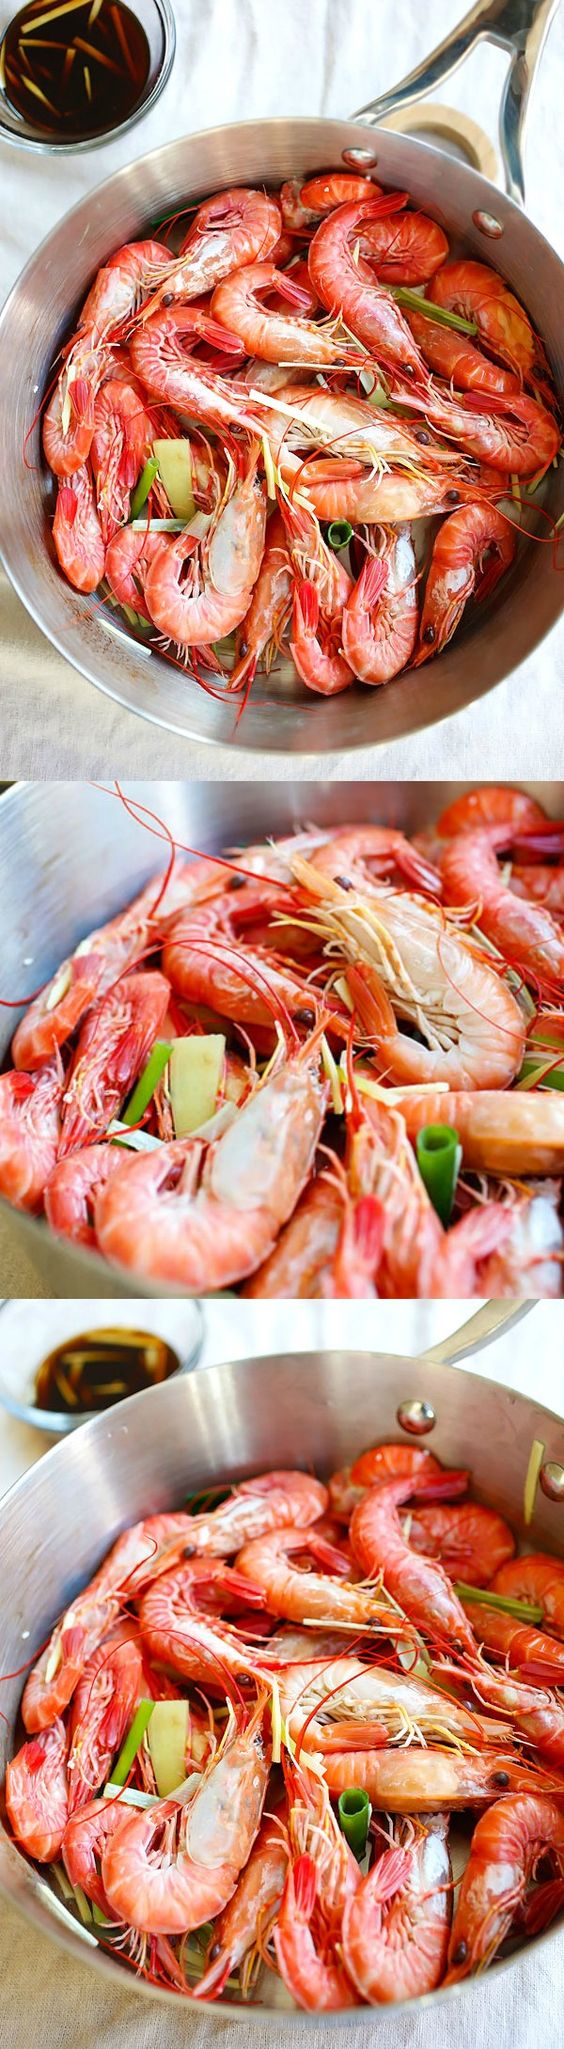 White boiled shrimp – a classic Hong Kong recipe where shrimp are boiled and served with a soy ginger sauce | rasamalaysia.com